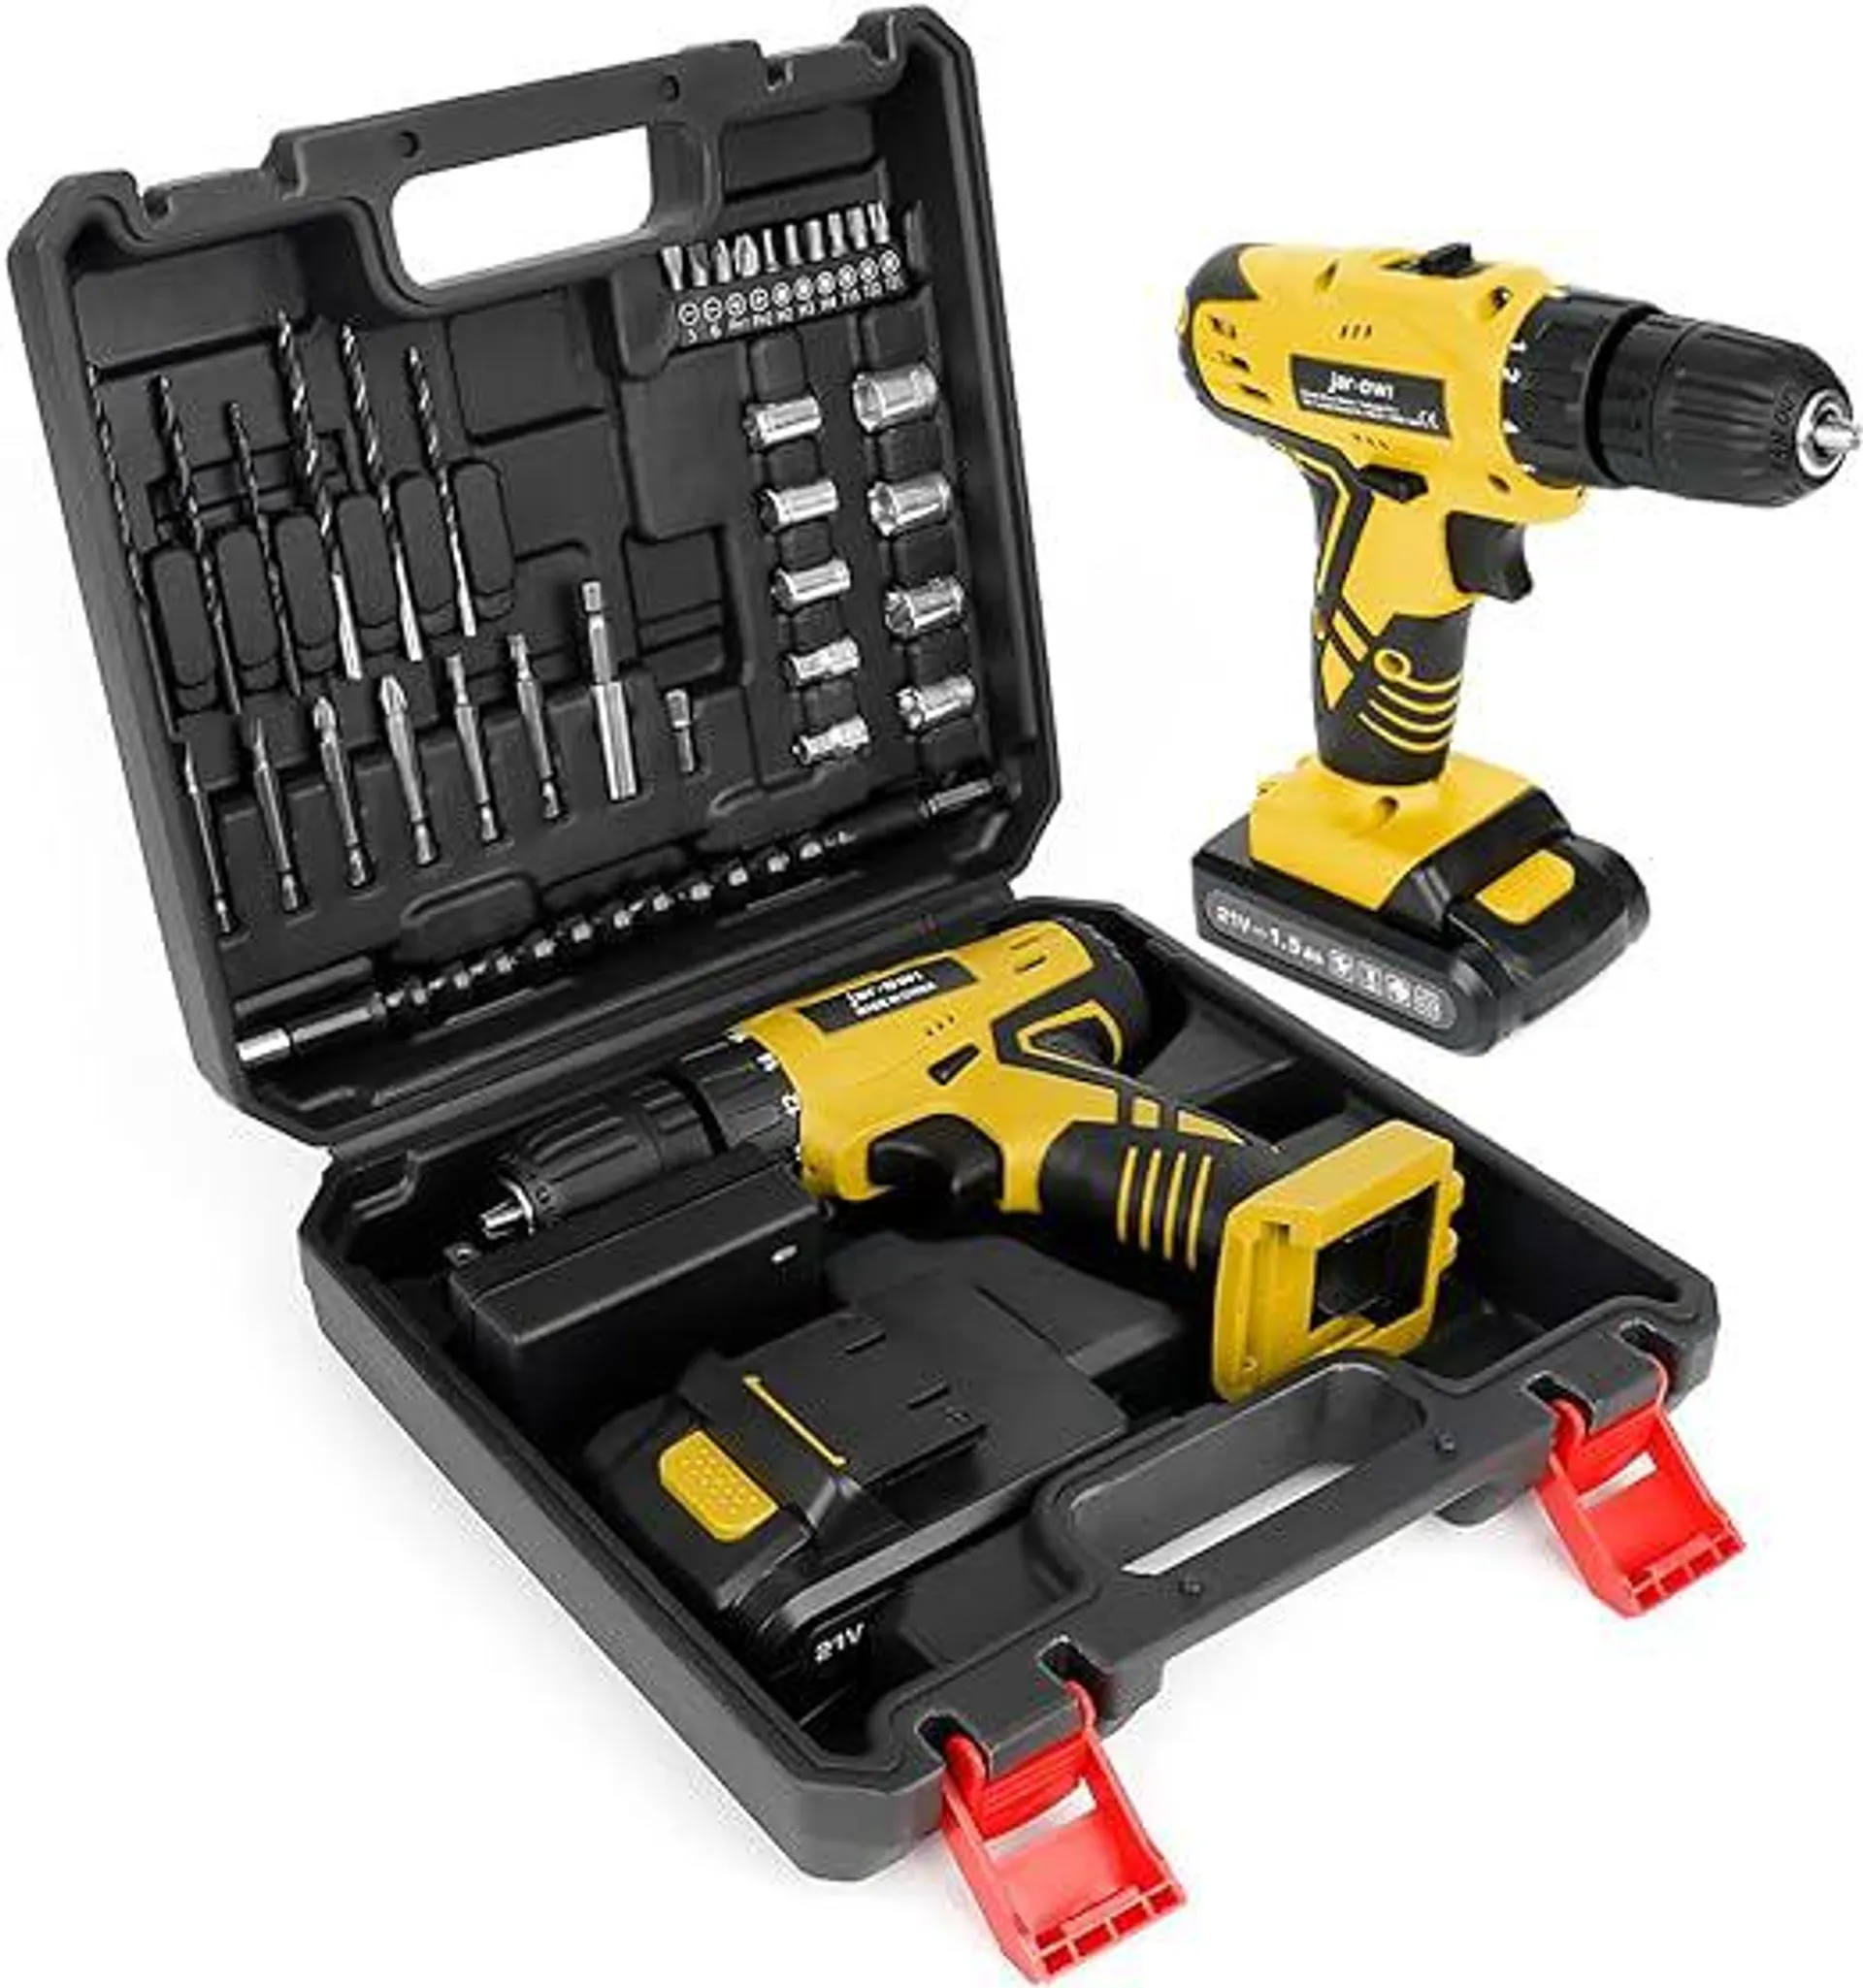 Portable Power Drill Set with 37PCS Drill Bit,21V Cordless Drill Kit with Battery and Charger,Jar-owl Home Tool Kit with Electric Drill,Power Tool Combo Kit for Men Women Office Repair Maintain-Yellow